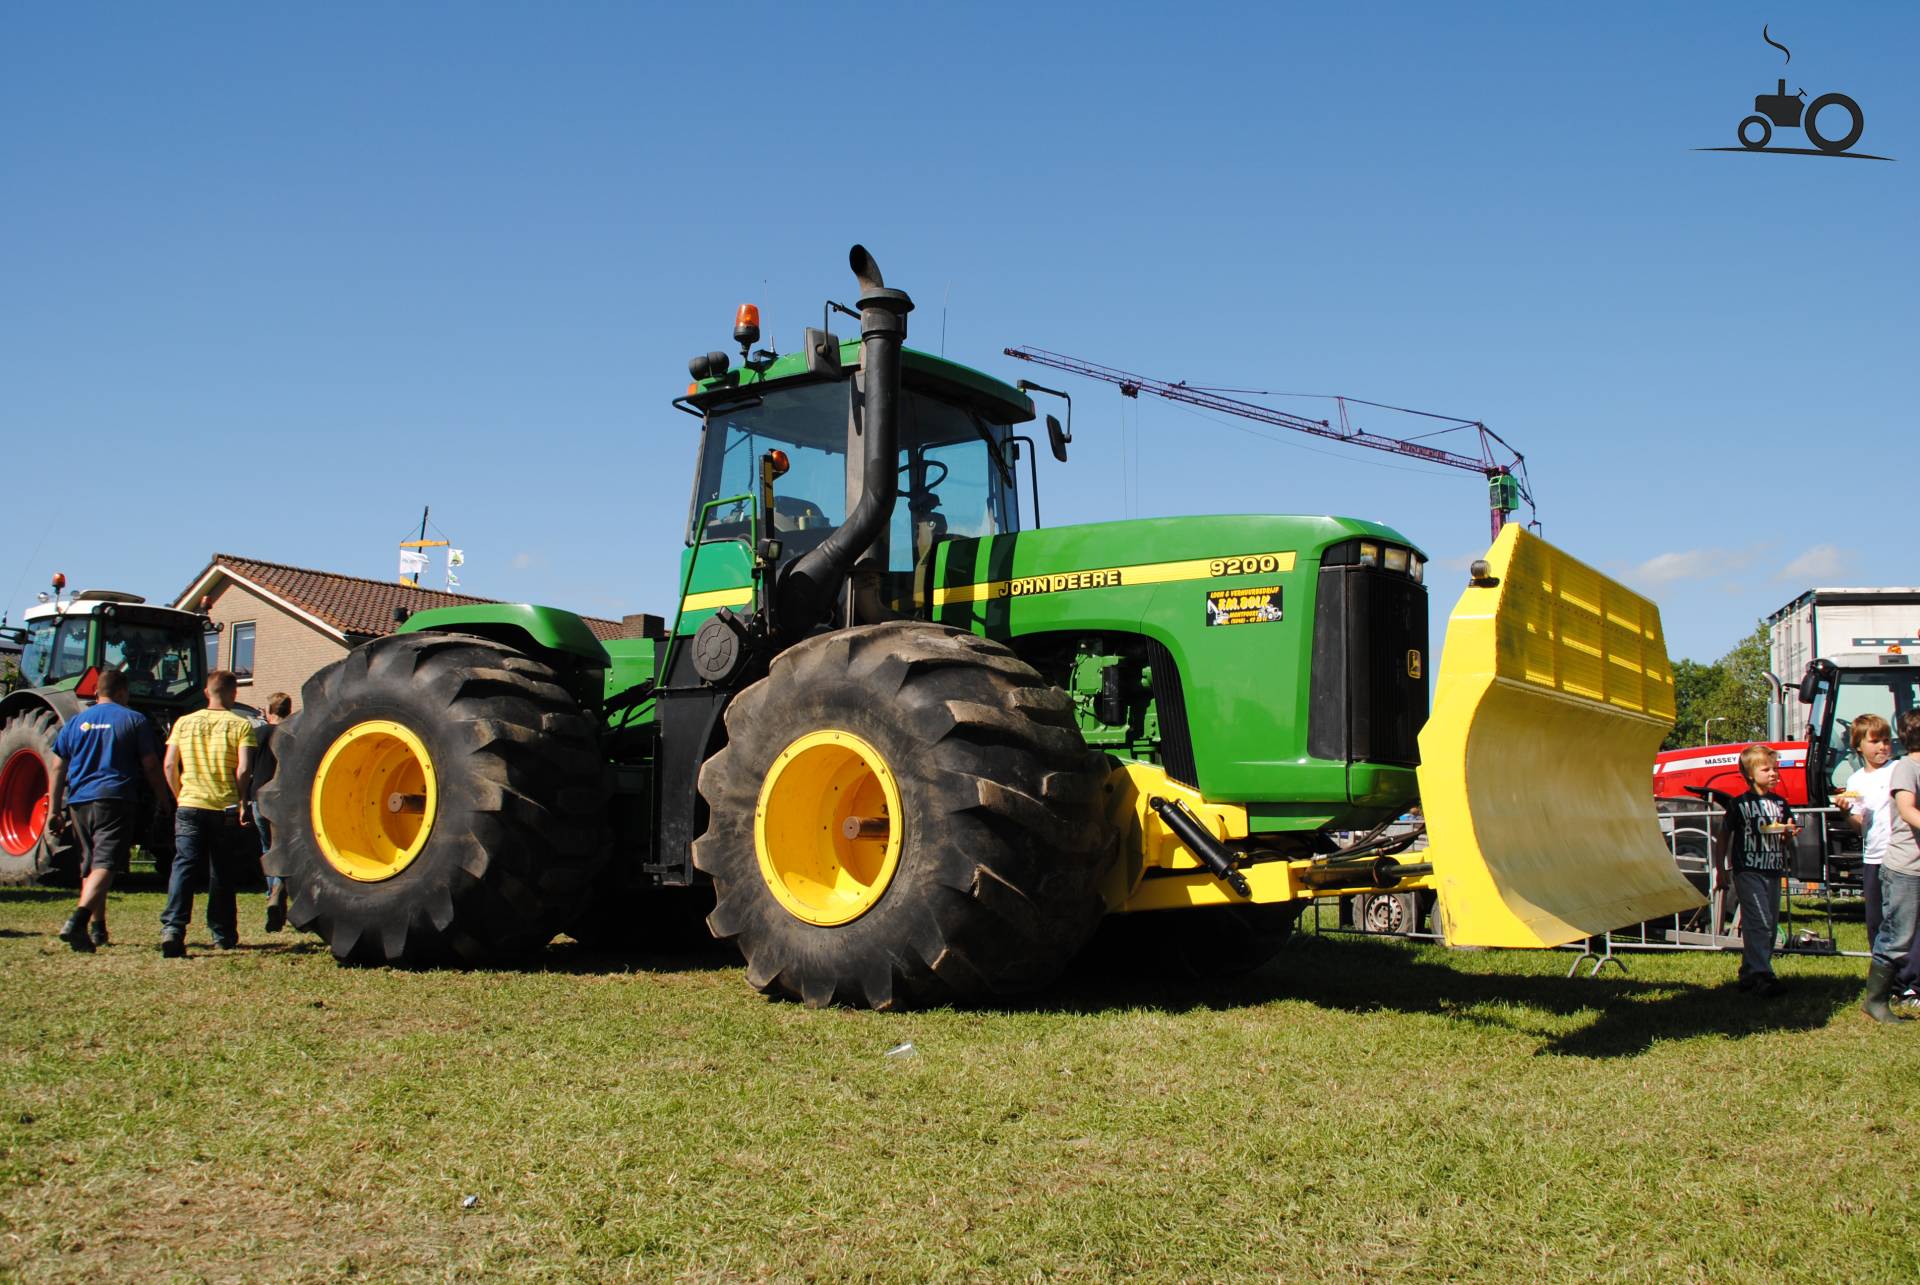 John Deere 9200 Specs and data - Everything about the John Deere 9200